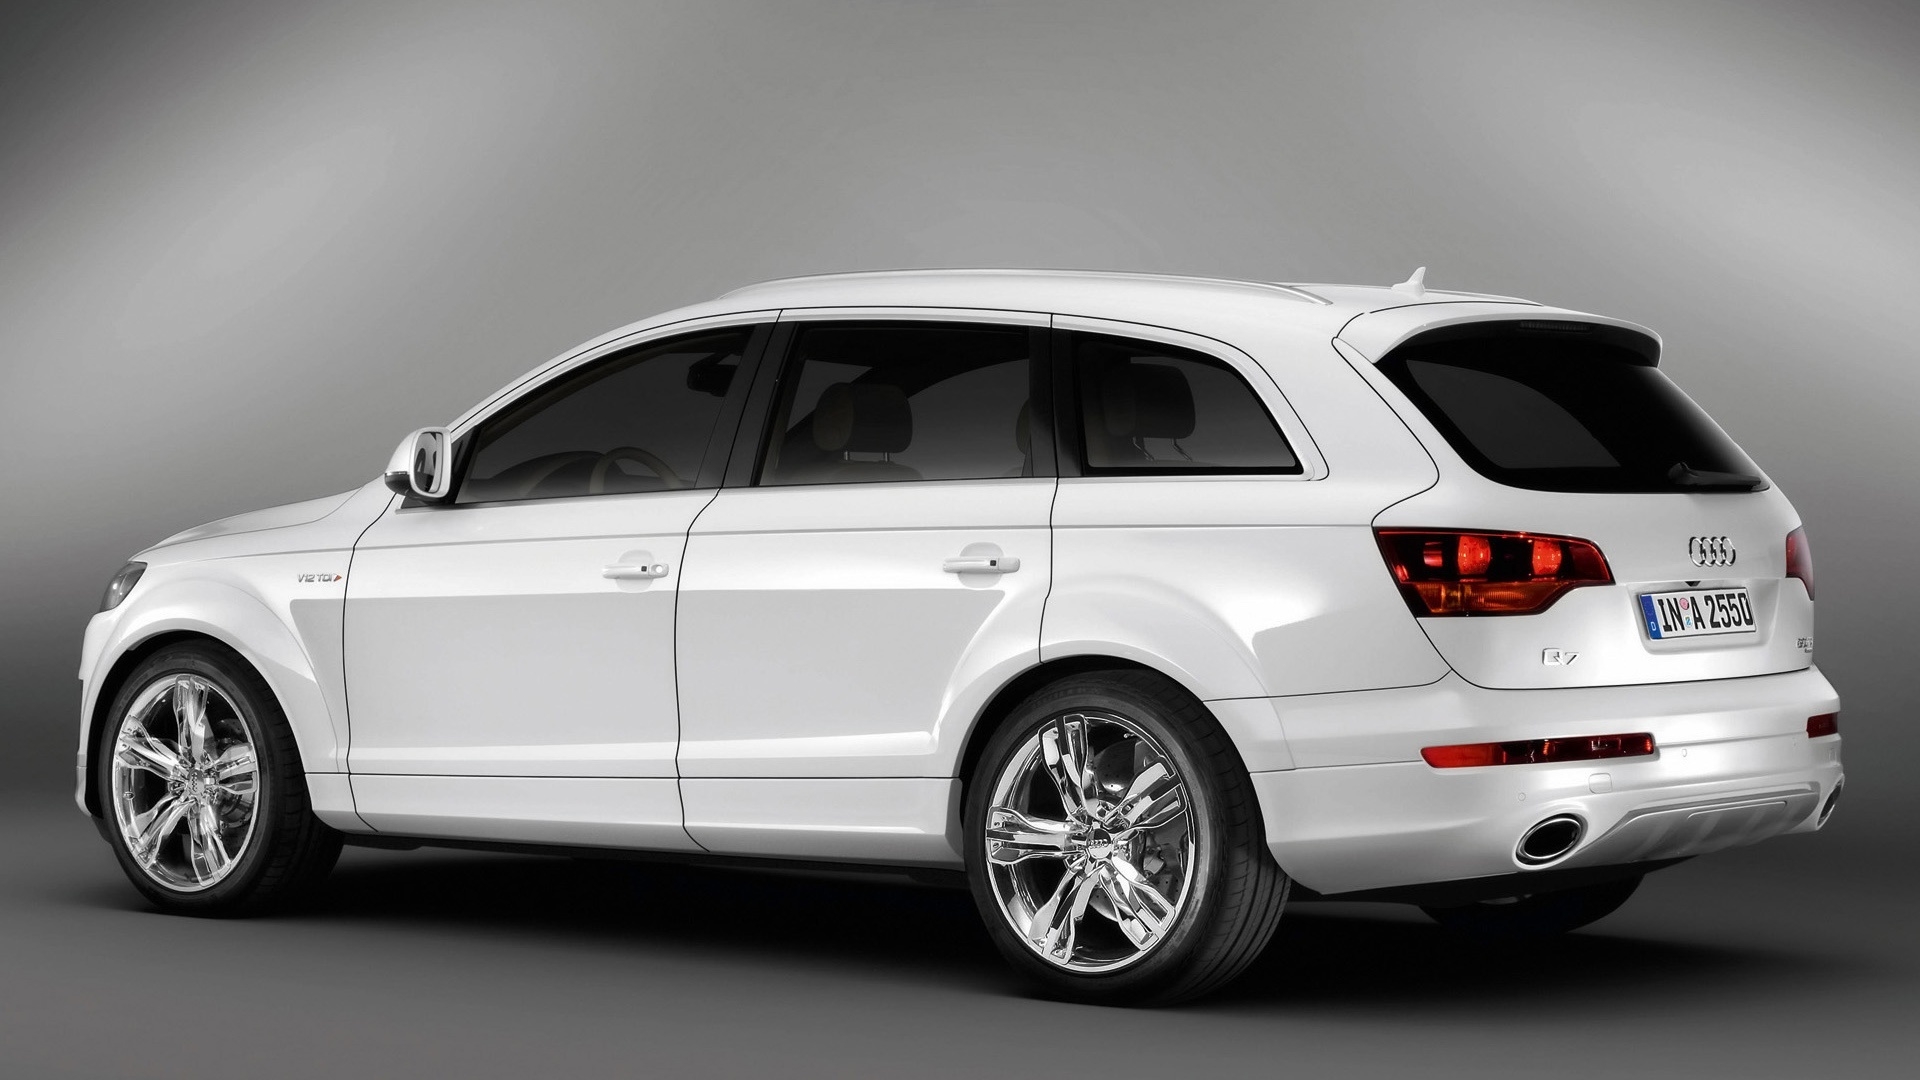 Audi Q7 Coastline Rear and Side for 1920 x 1080 HDTV 1080p resolution